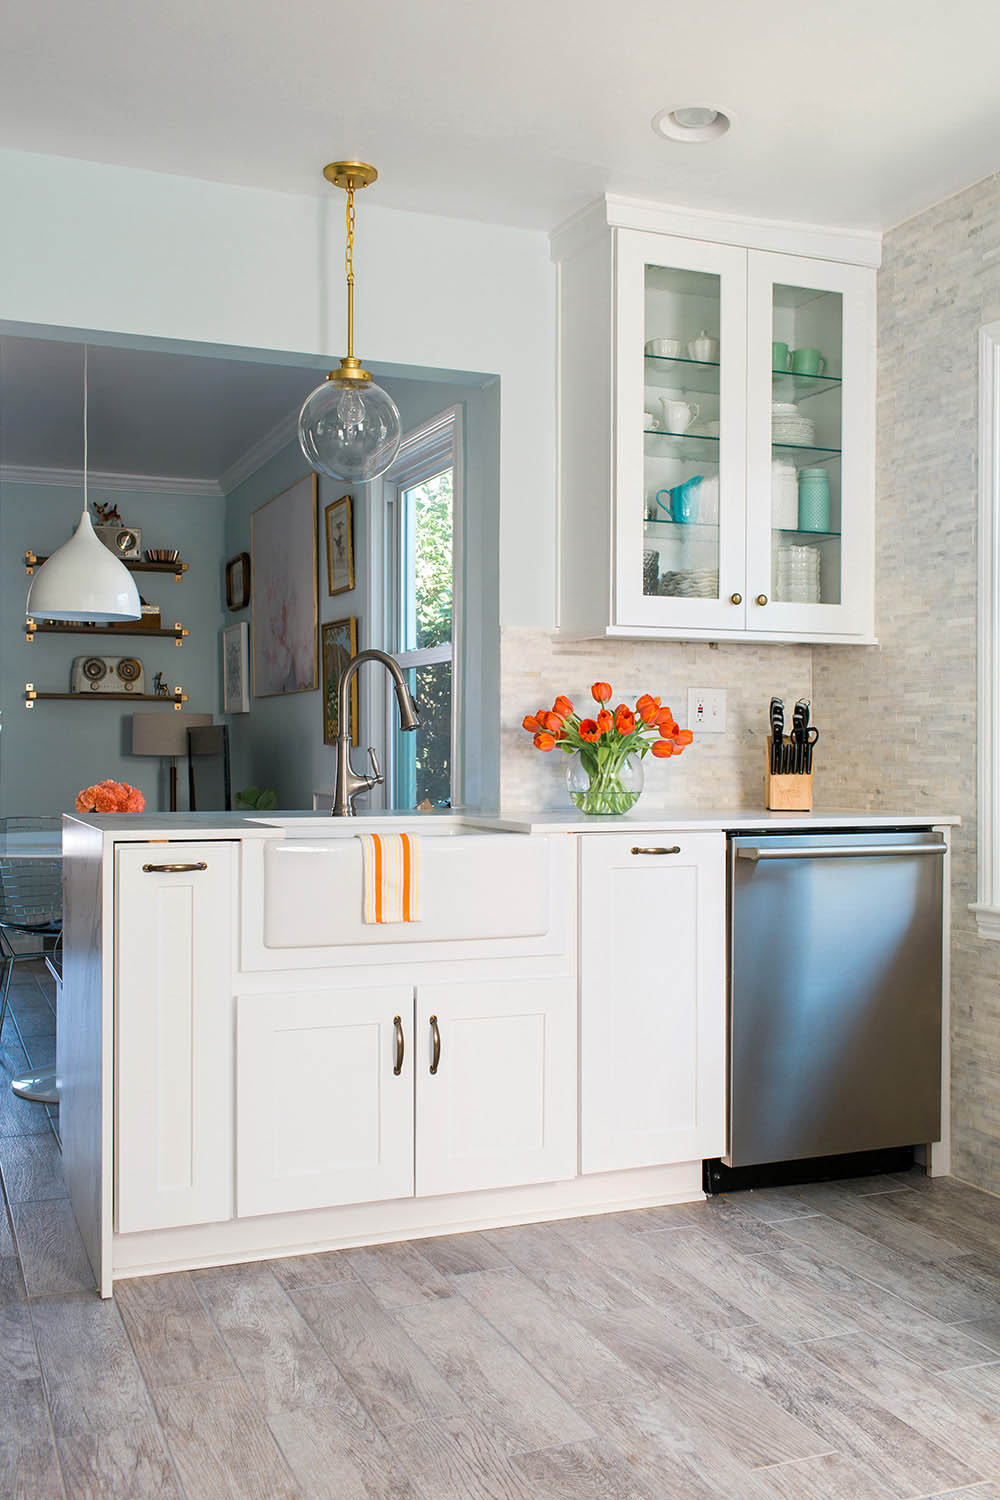 A kitchen with white cabinets and bronze hardware, a hanging light fixture, silver dishwasher and a white cabinet with glassware.